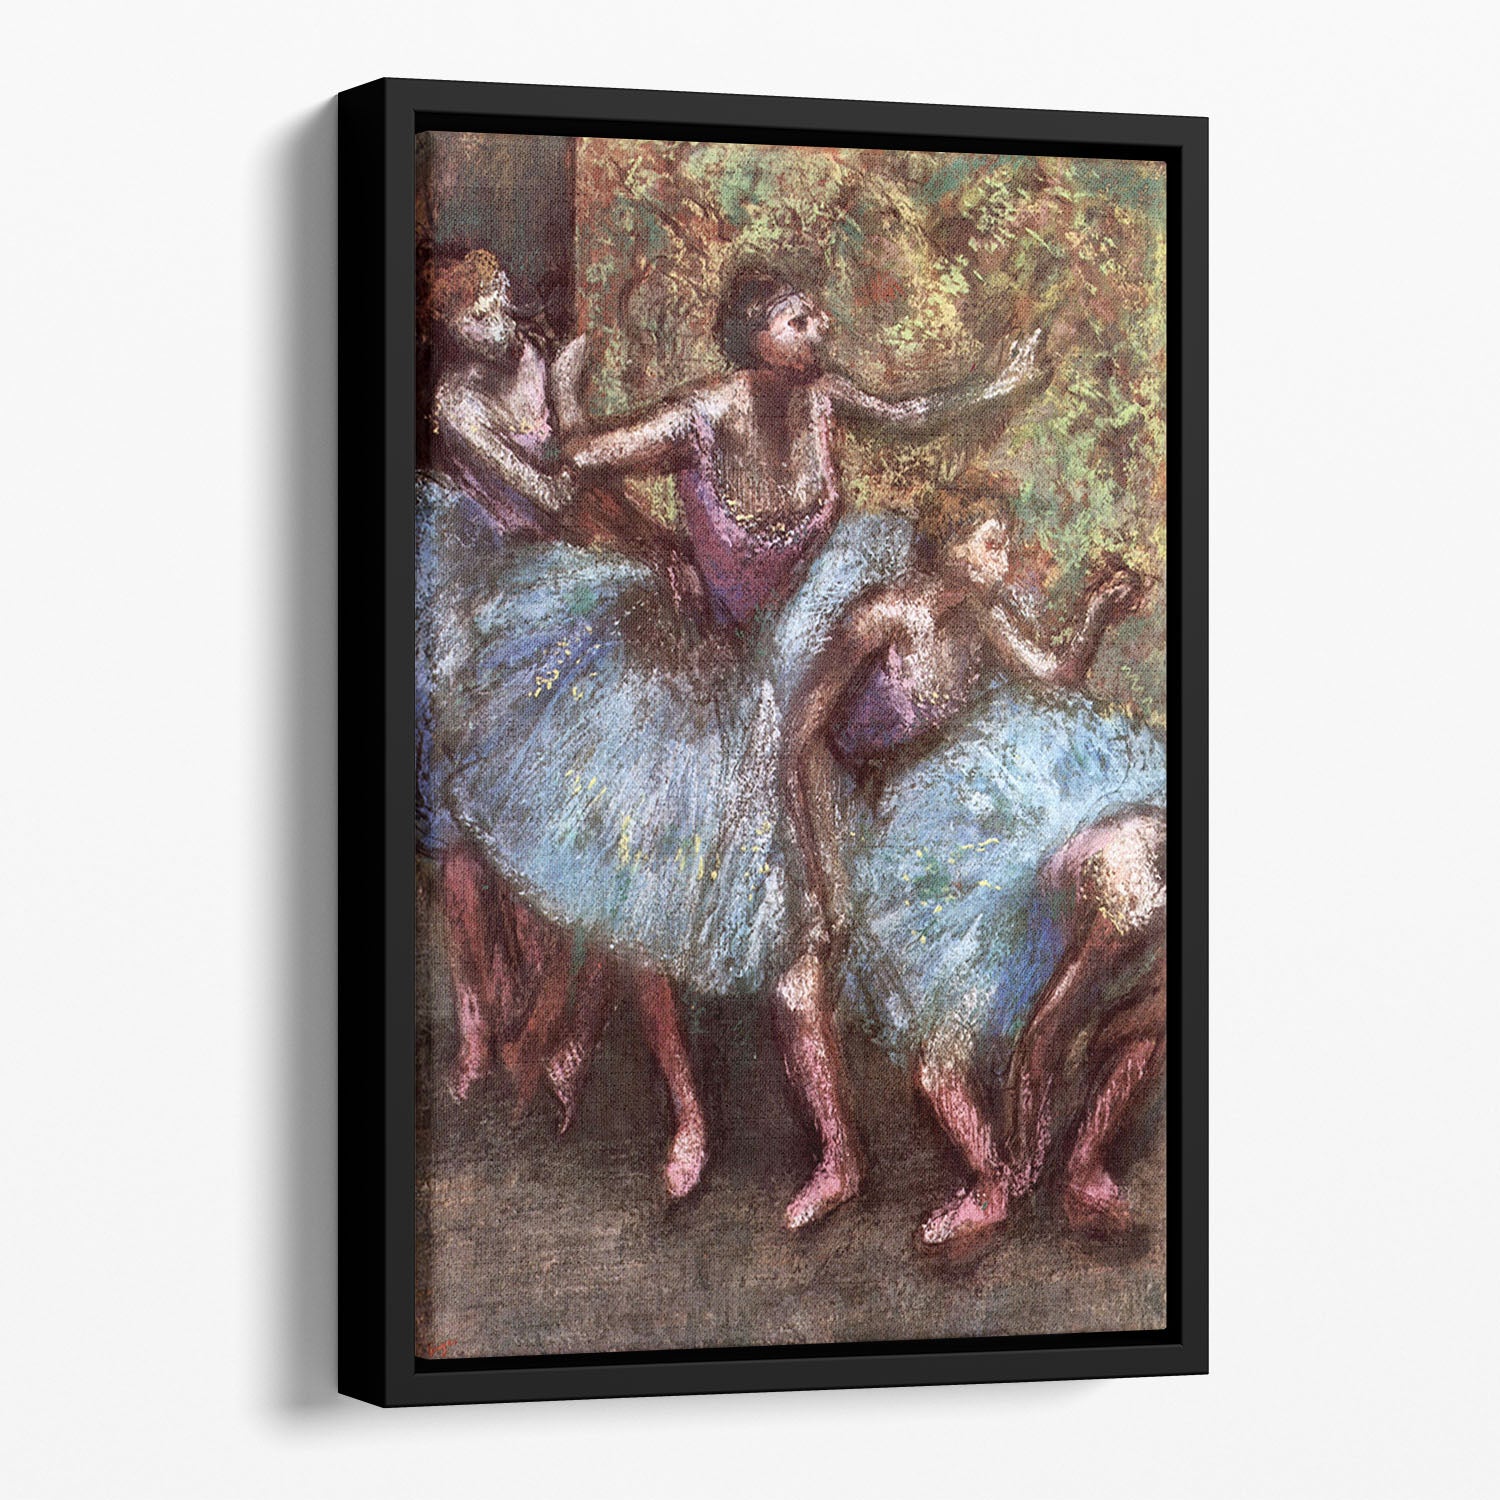 Four dancers behind the scenes 1 by Degas Floating Framed Canvas